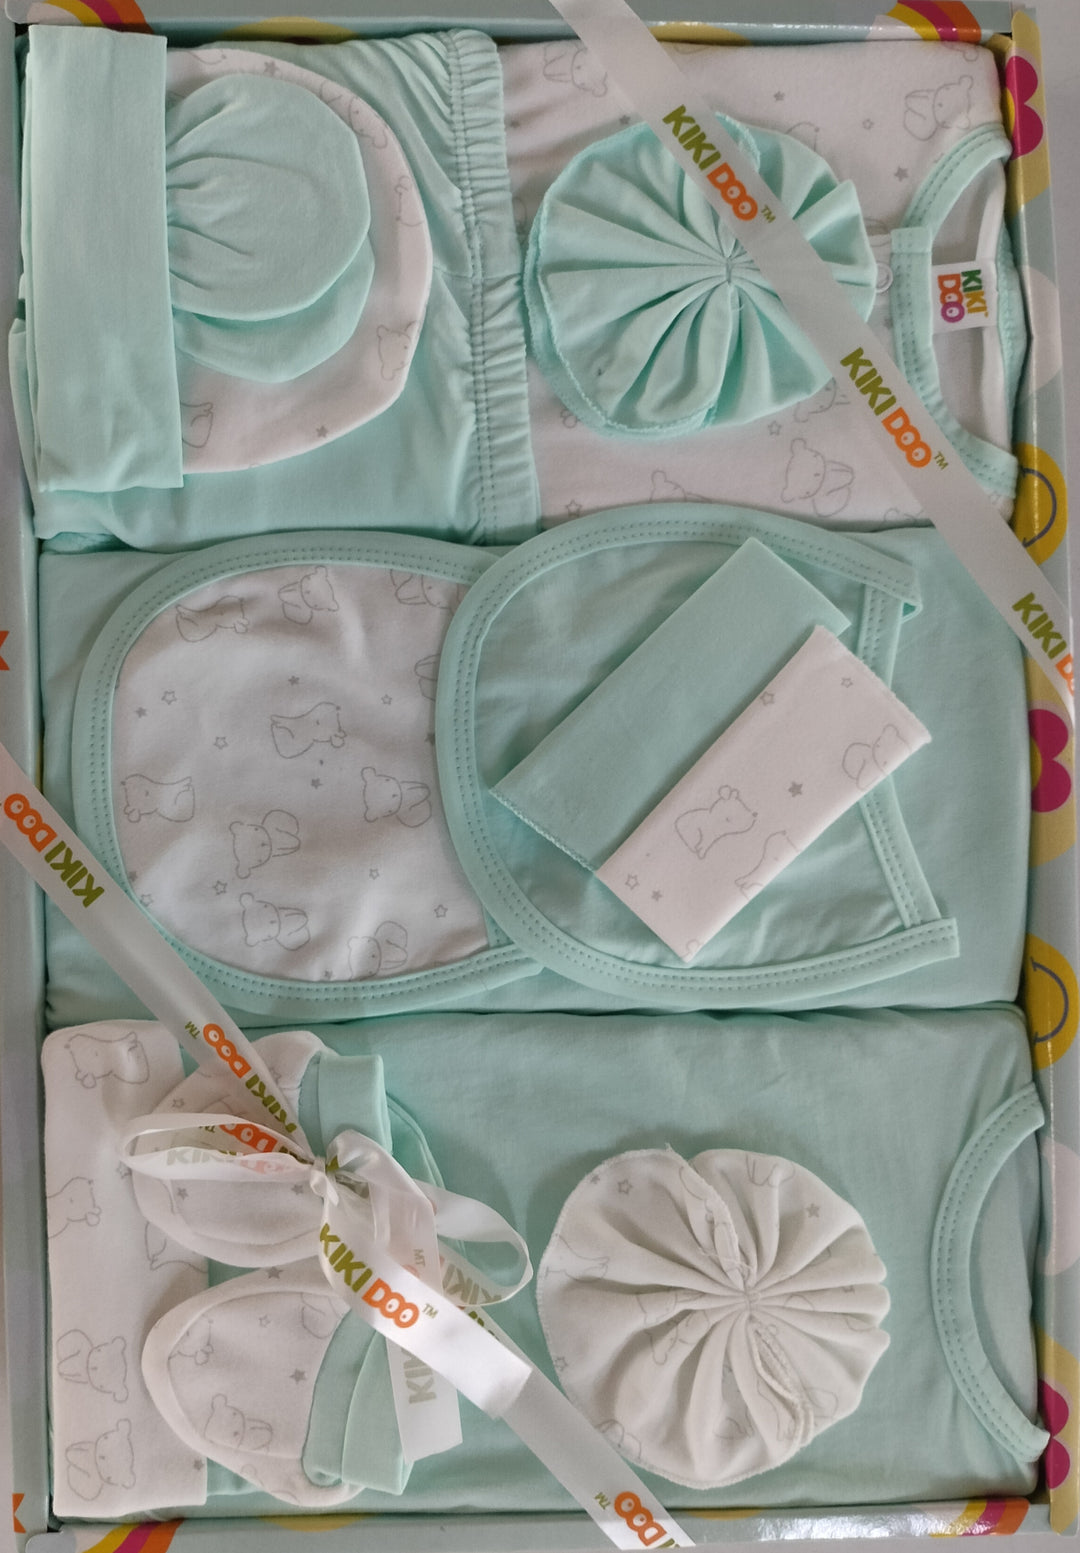 14 Pieces Full Sleeves New Born Baby Gift Set, Infant Gift Set, Cotton Clothing Set